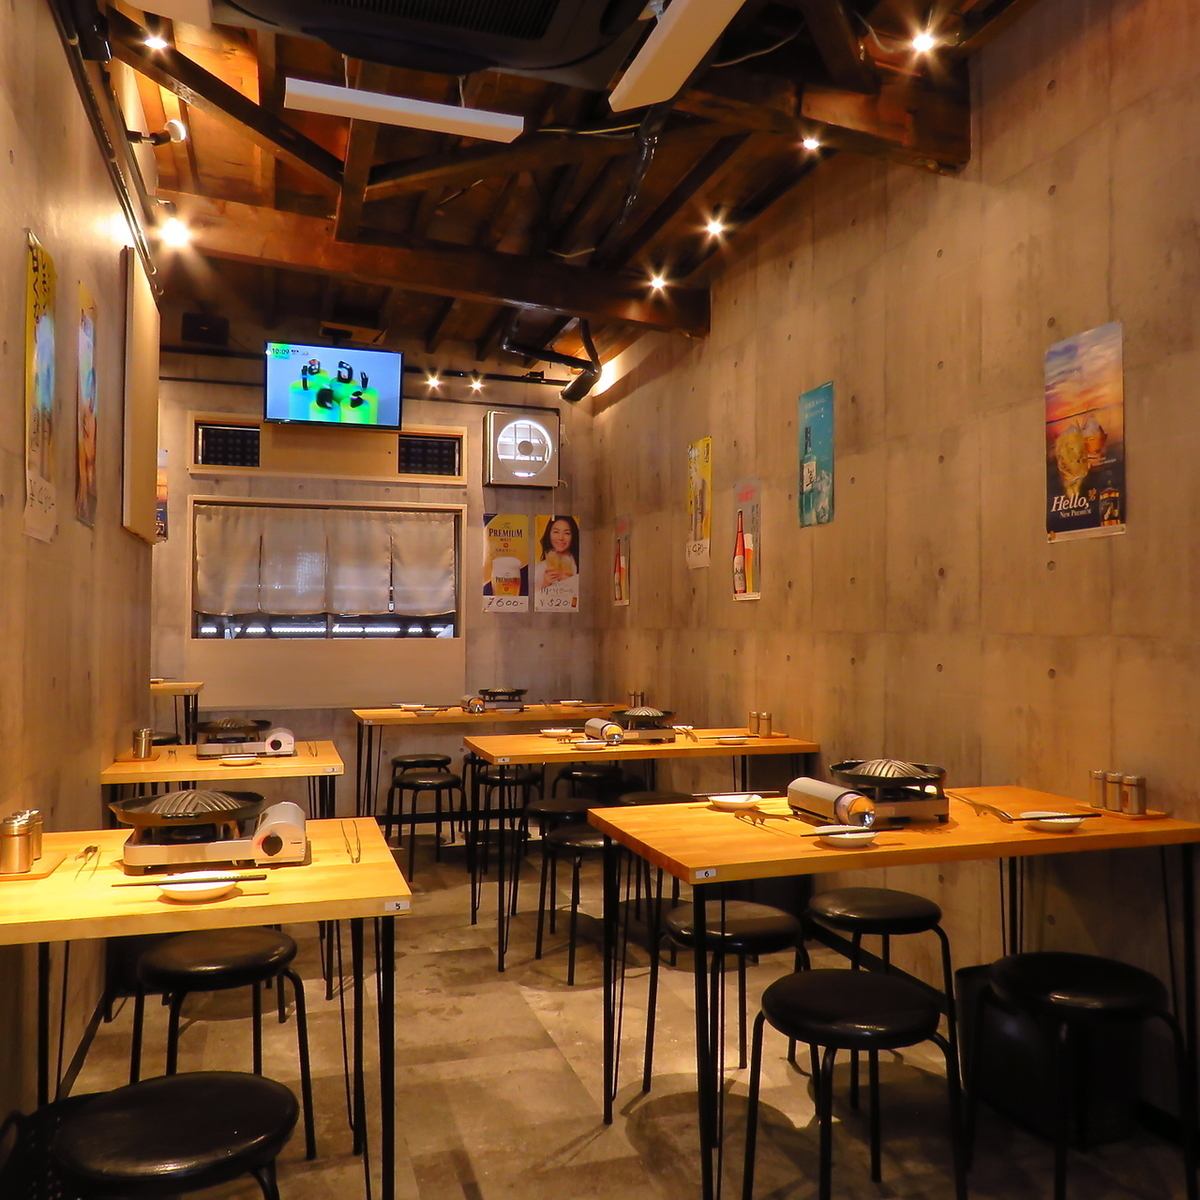 Enjoy a private Yakiniku party in our spacious restaurant that can accommodate up to 30 people!